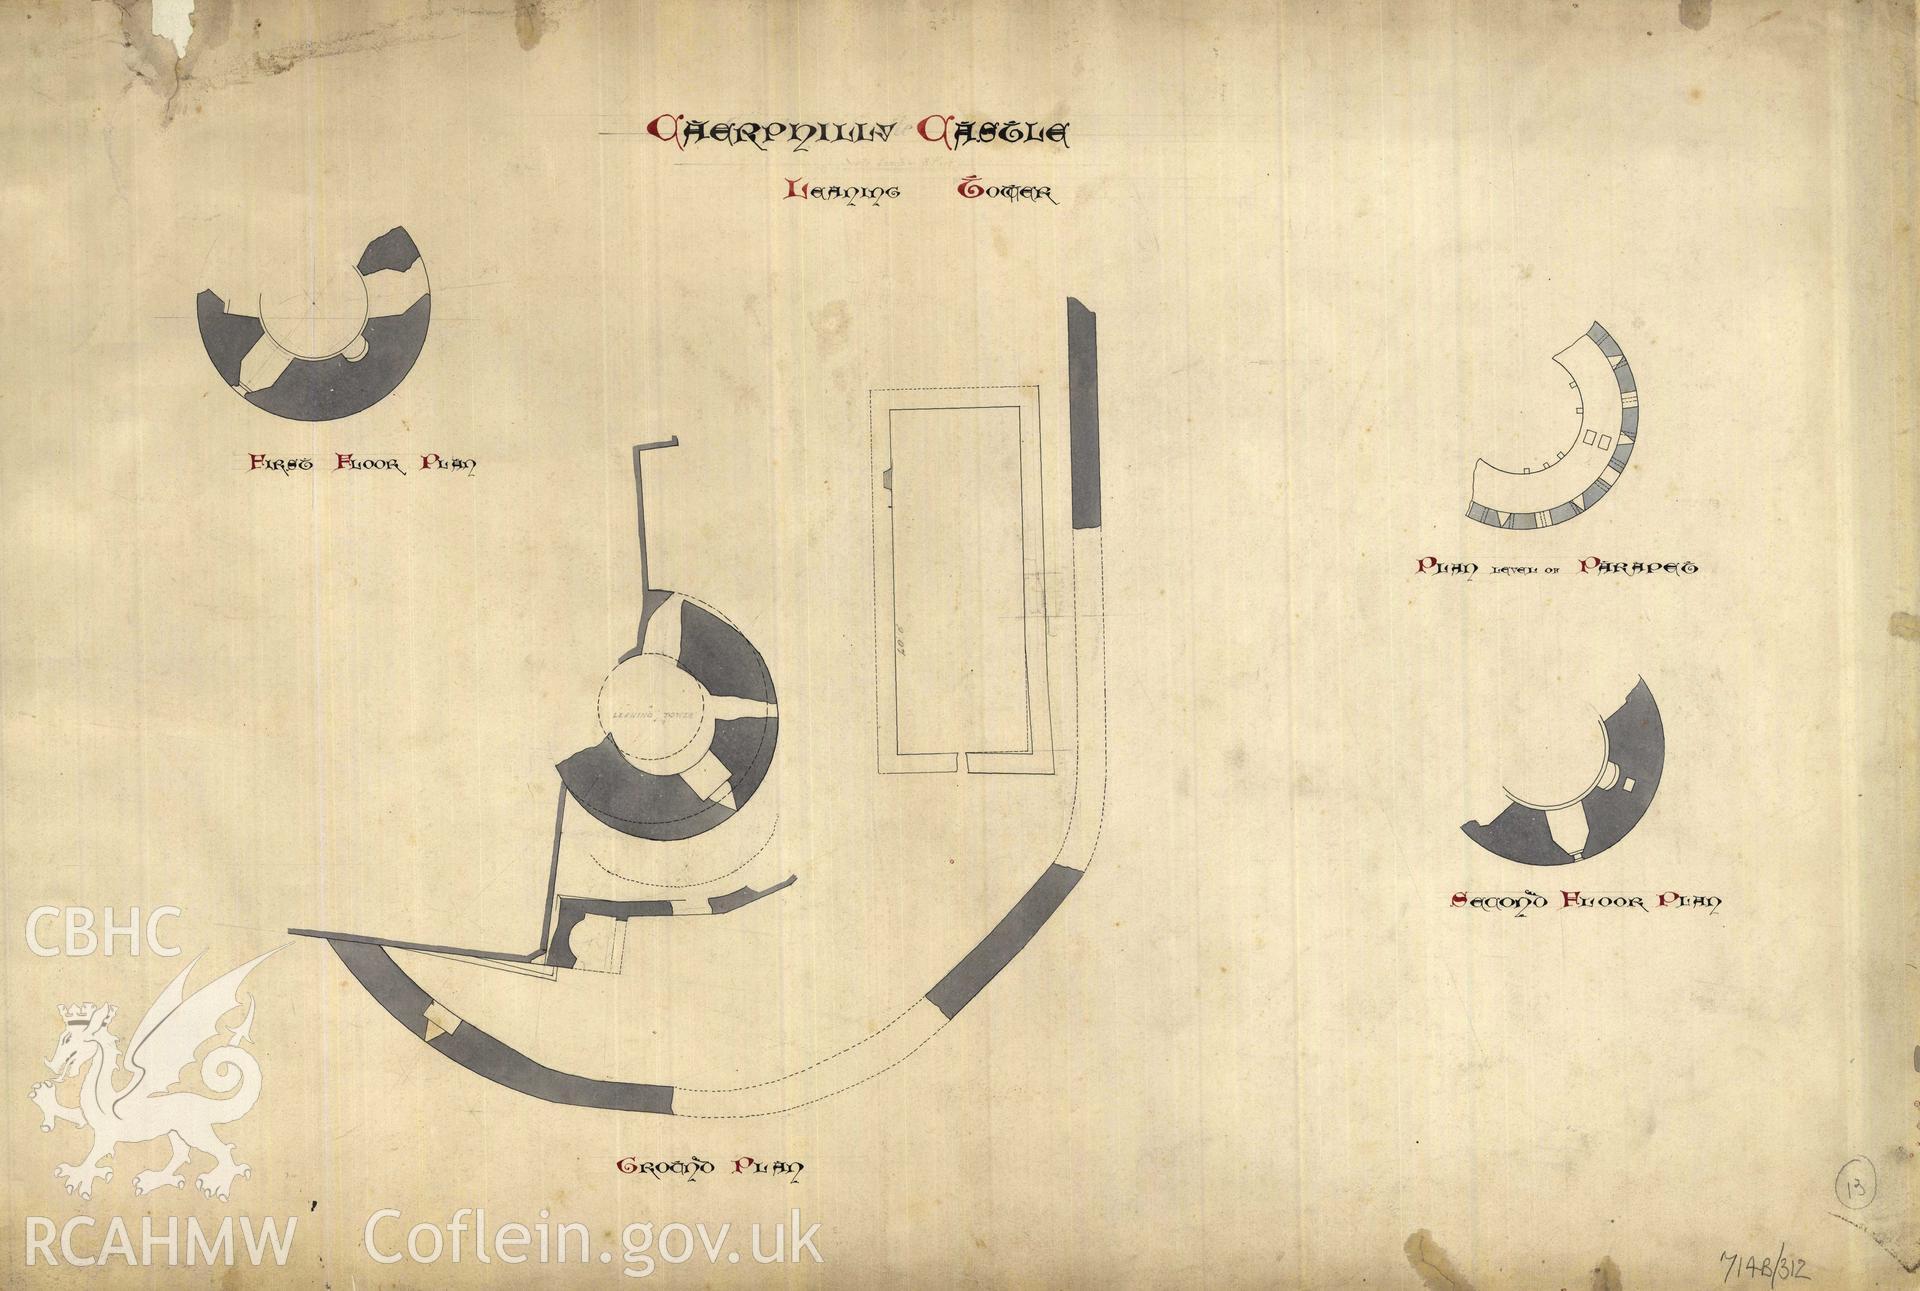 Cadw guardianship monument drawing of Caerphilly Castle. Castle Plan, Leaning Tower. Cadw Ref. No. 714B/312. No scale.